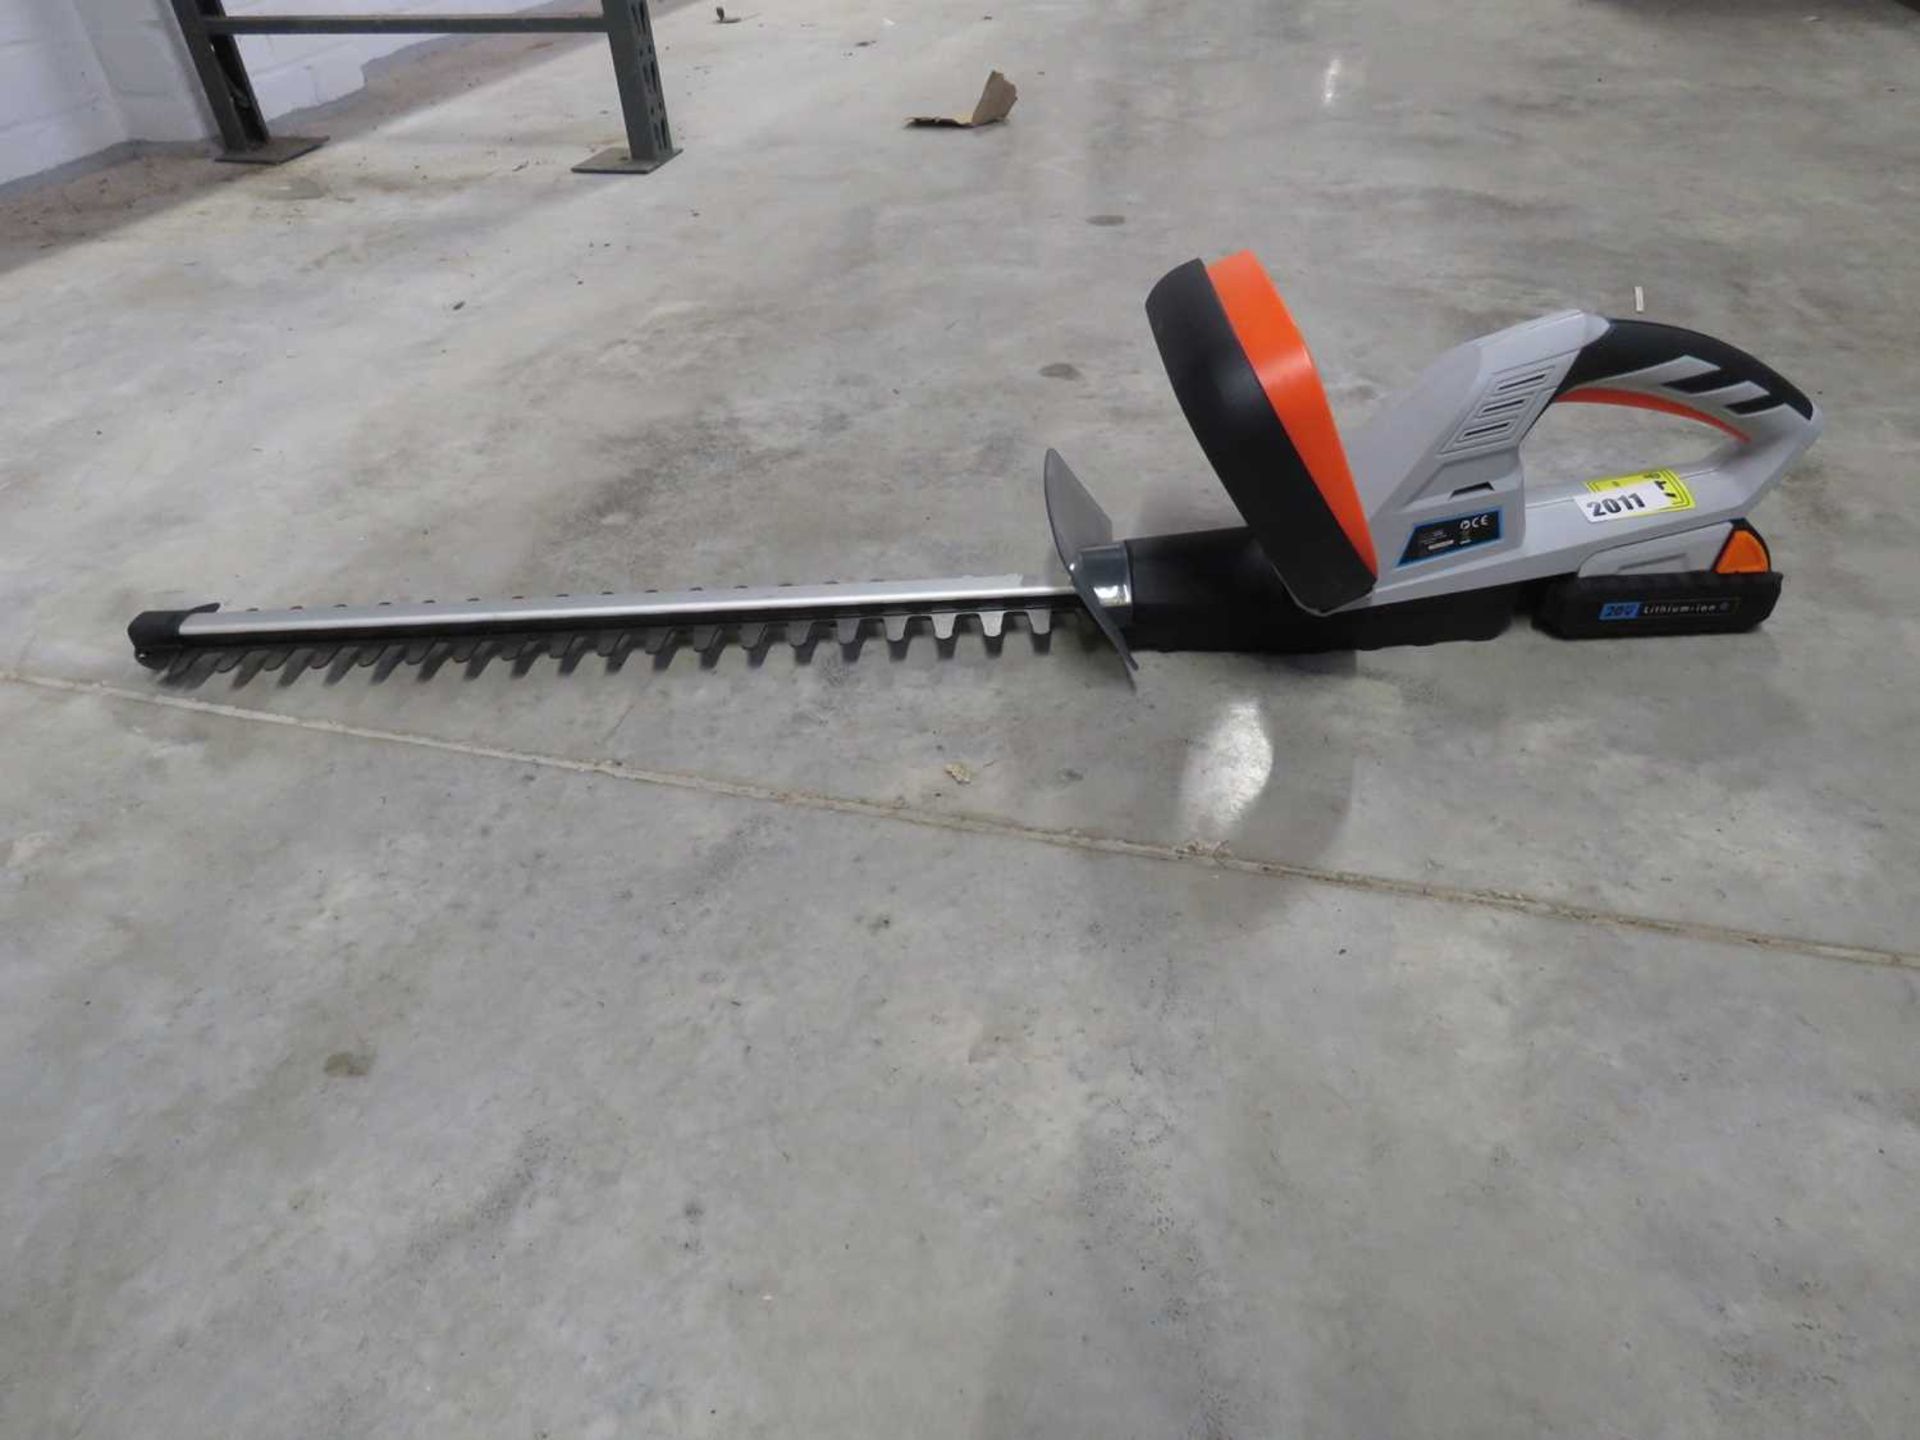 Cordless VonHaus hedge trimmer with battery, no charger